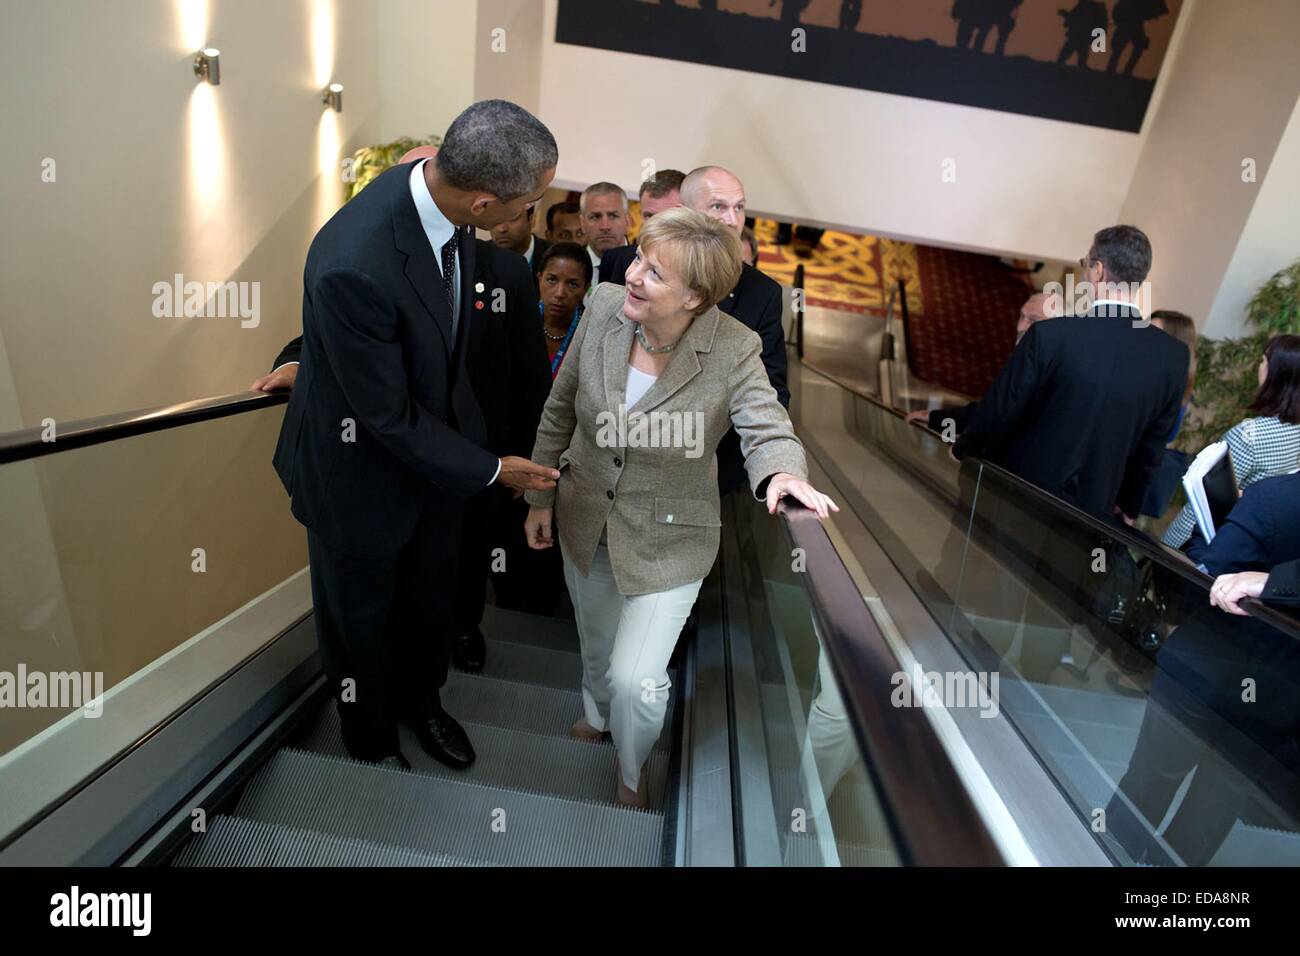 US President Barack Obama continues a conversation with German Chancellor Angela Merkel on the escalator following their meeting with other leaders at the NATO Summit September 4, 2014 in Newport, Wales. Stock Photo